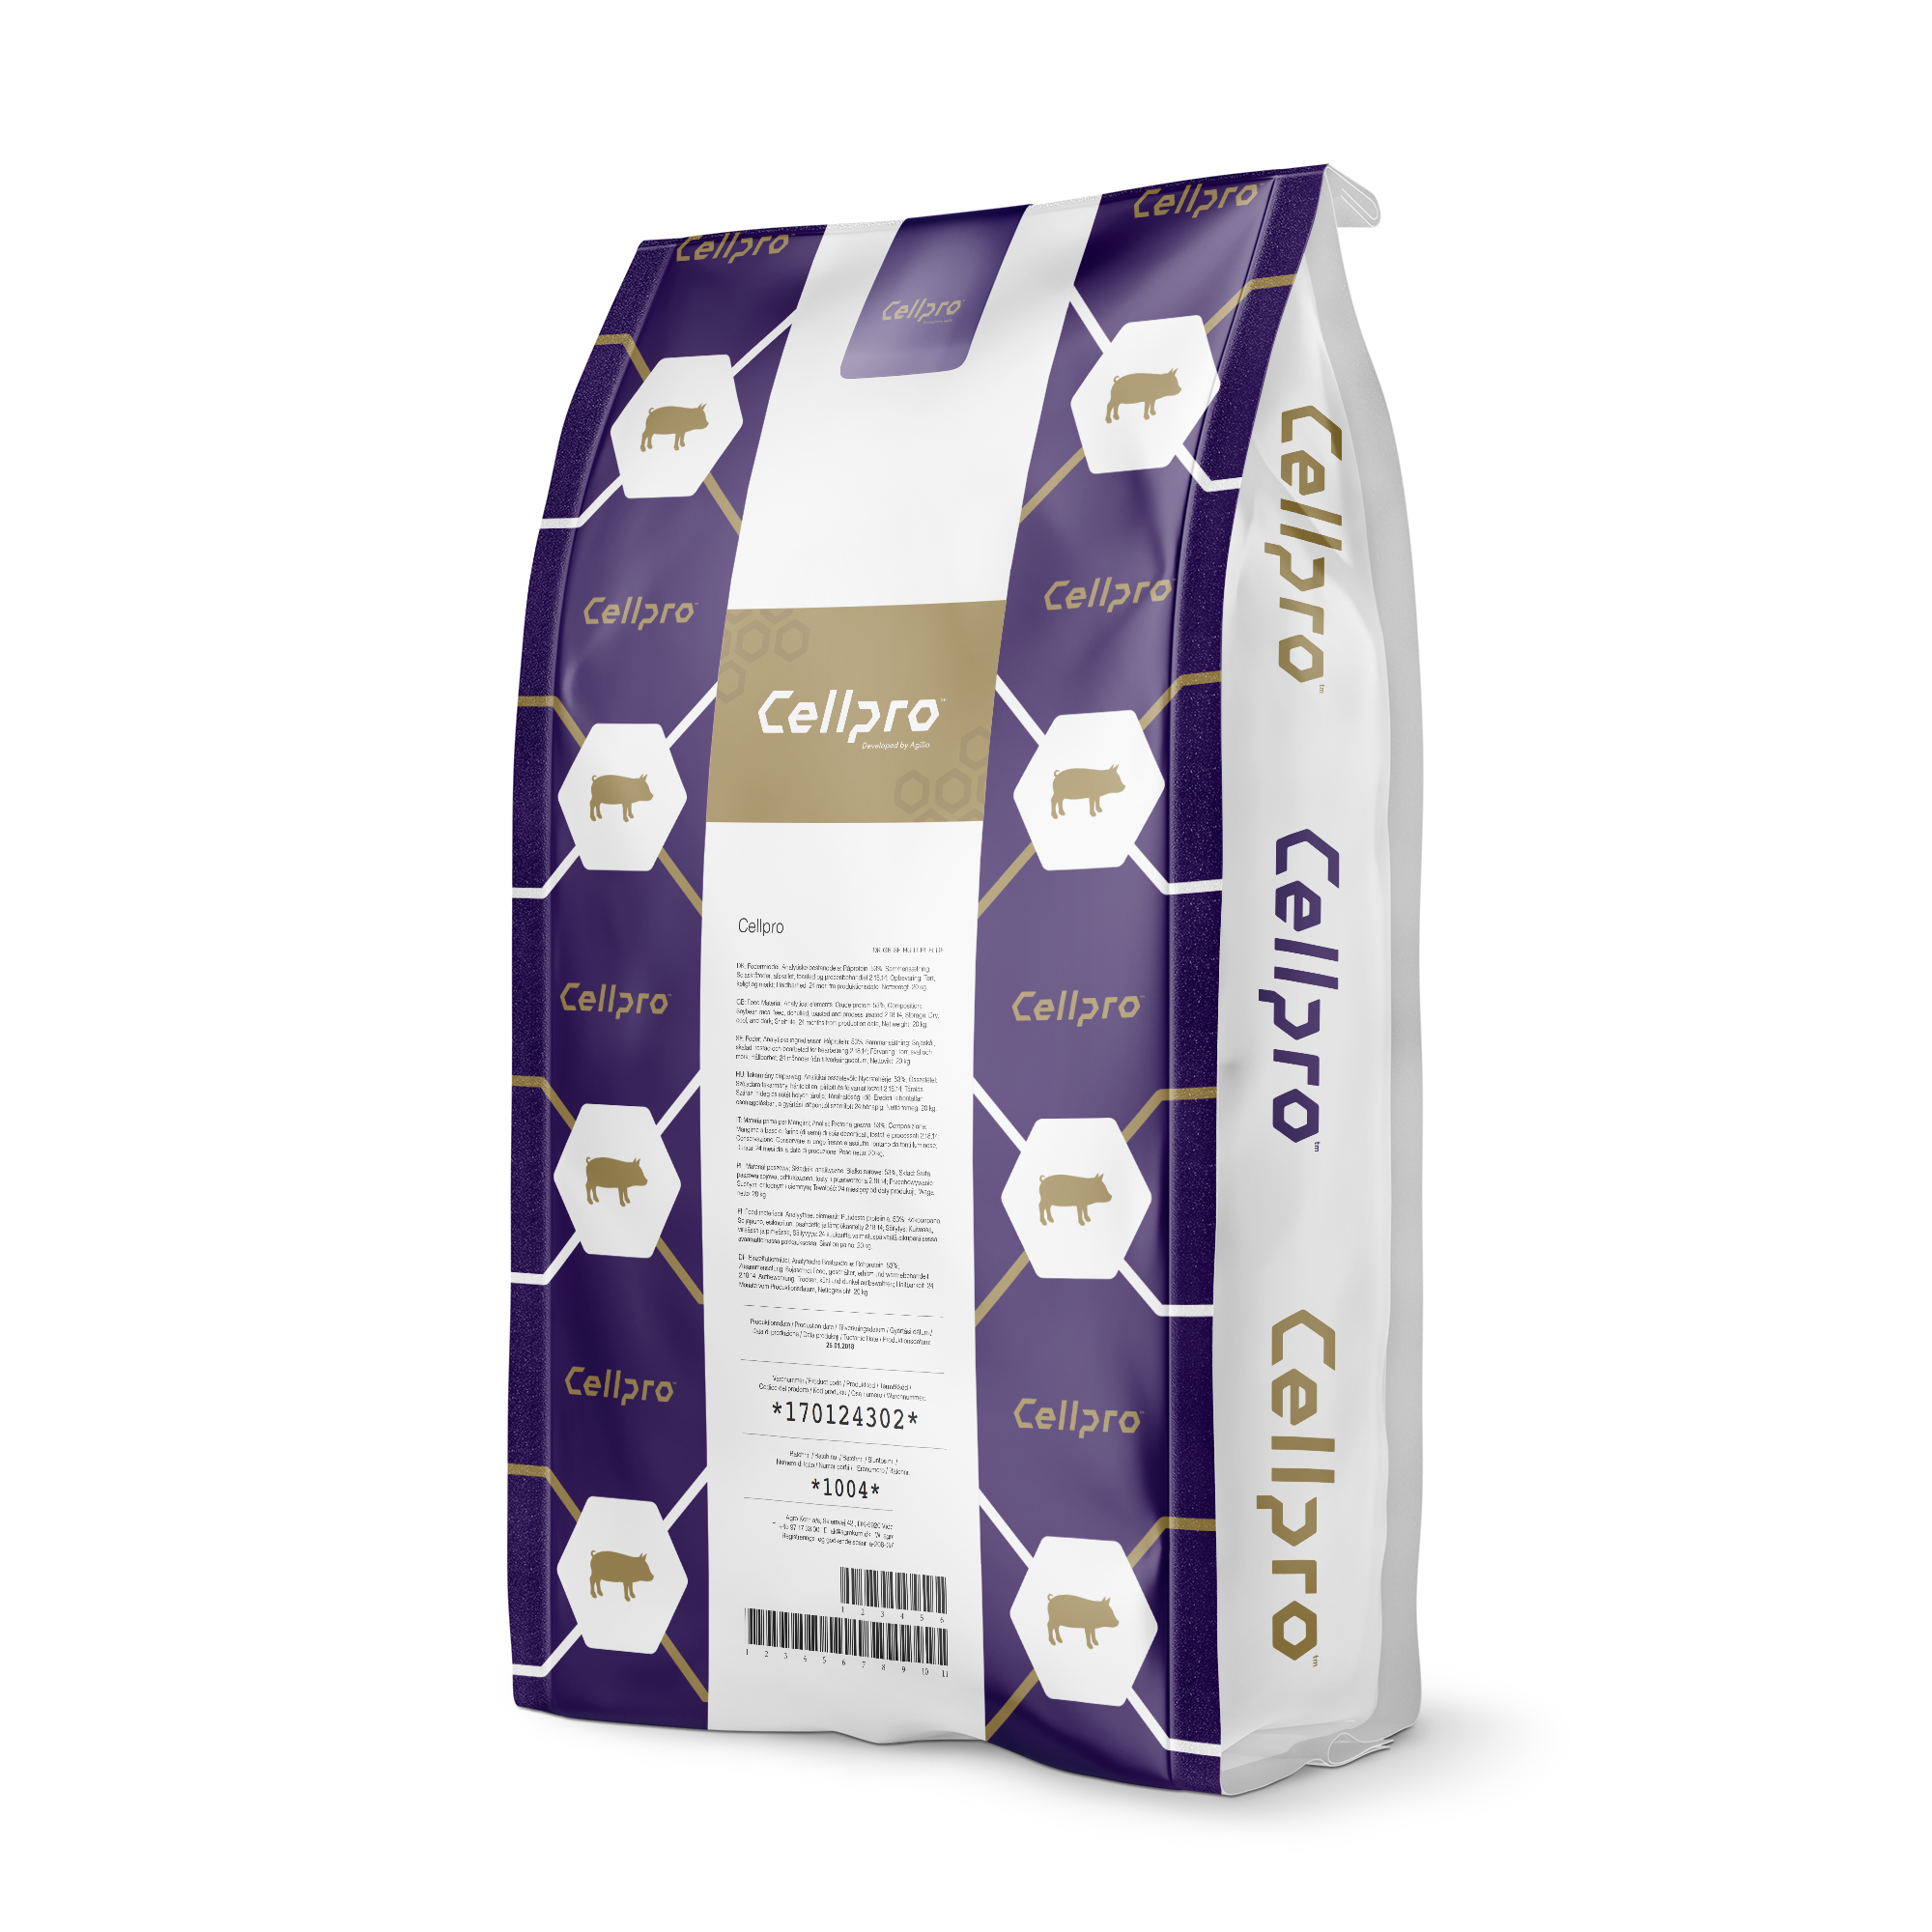 Primary Diets Cellpro Bag